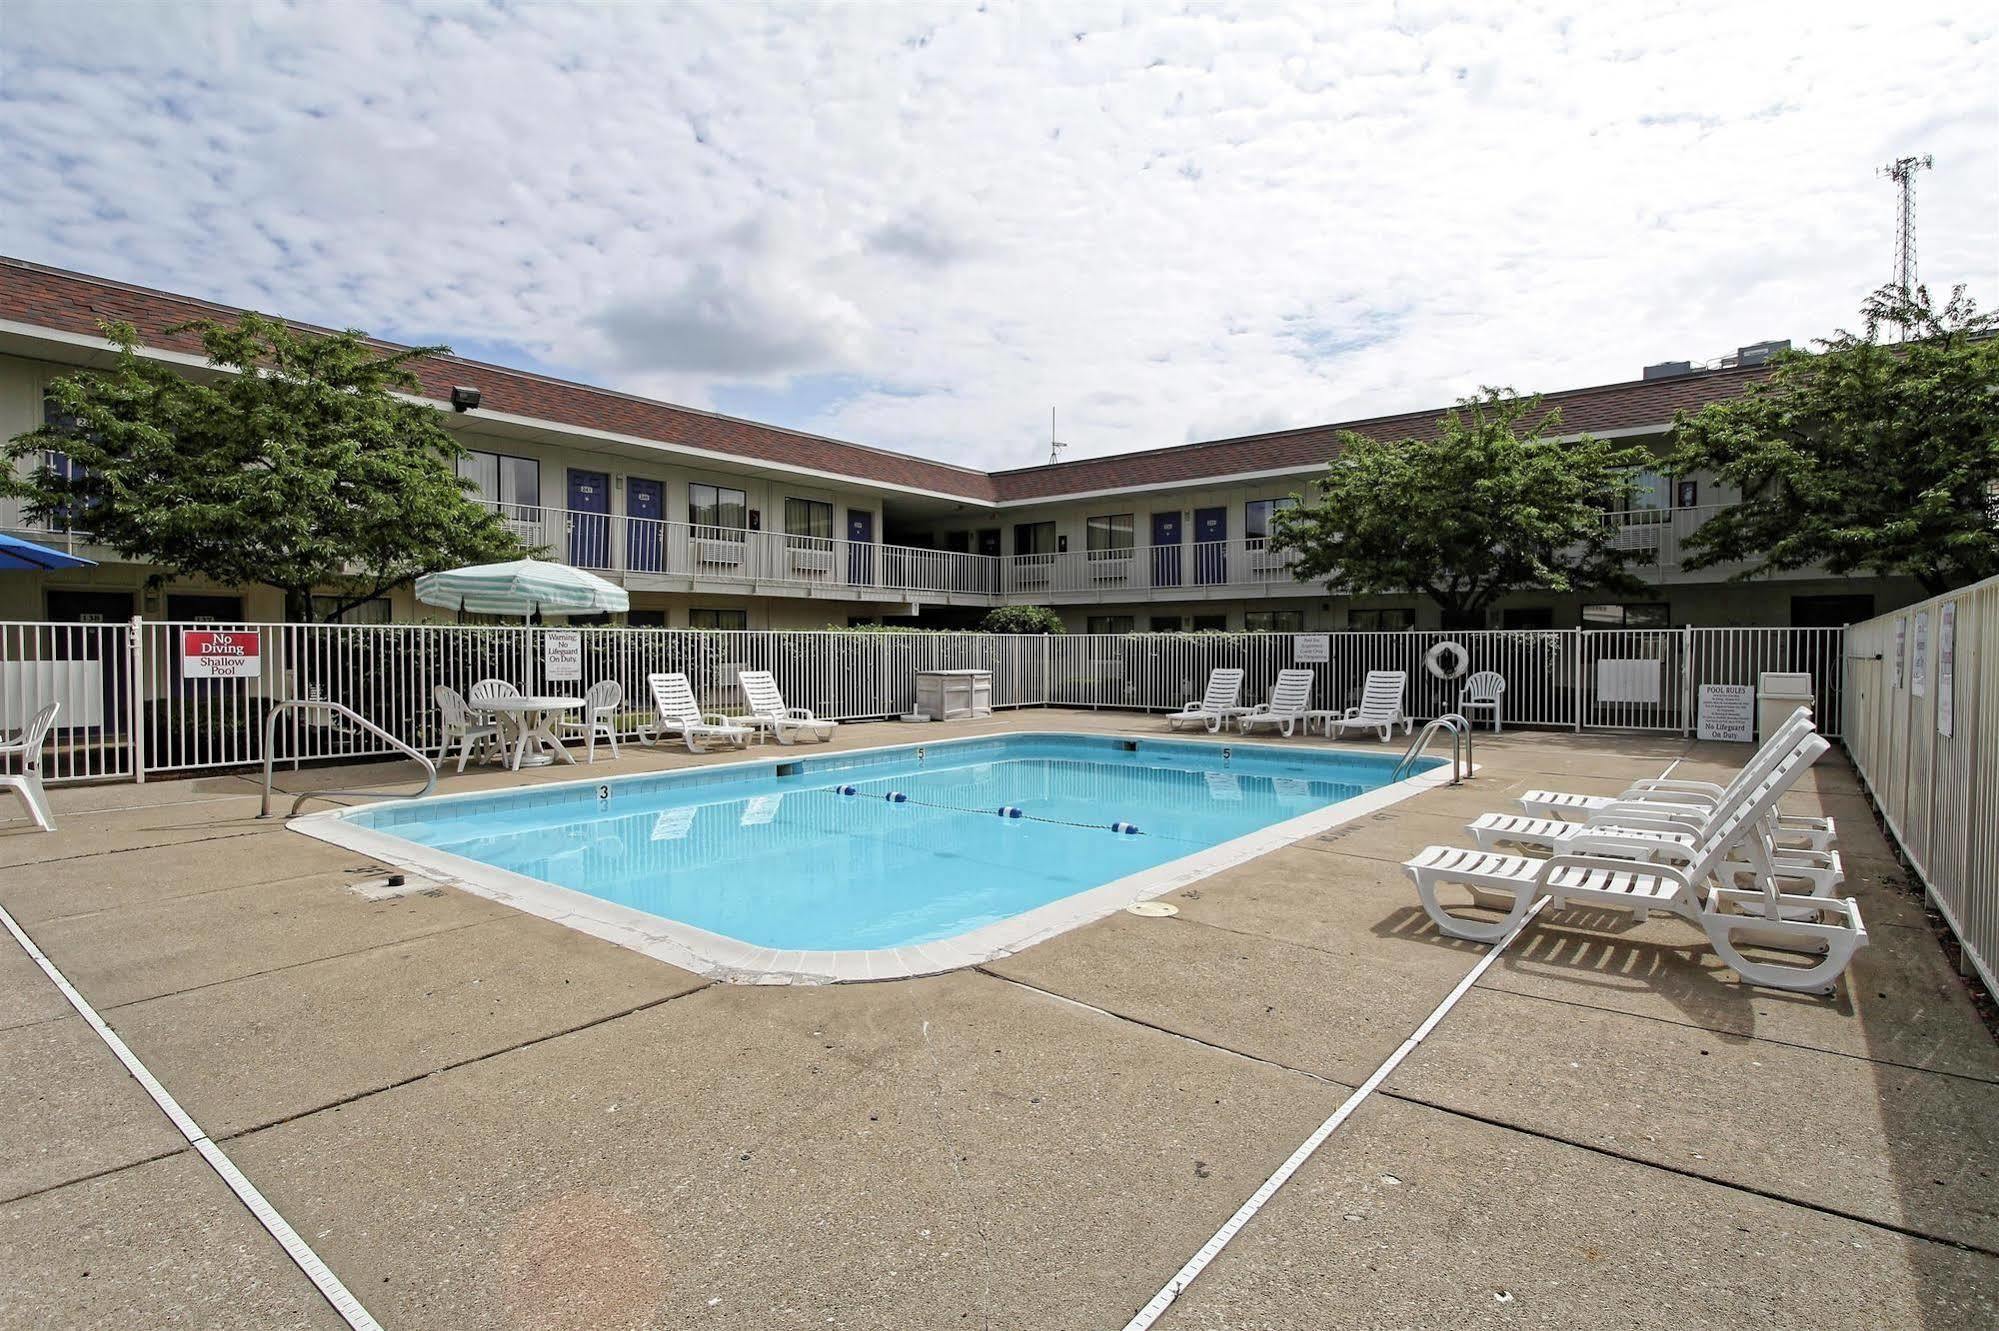 Motel 6-Amherst, Oh - Cleveland West - Lorain Exterior photo